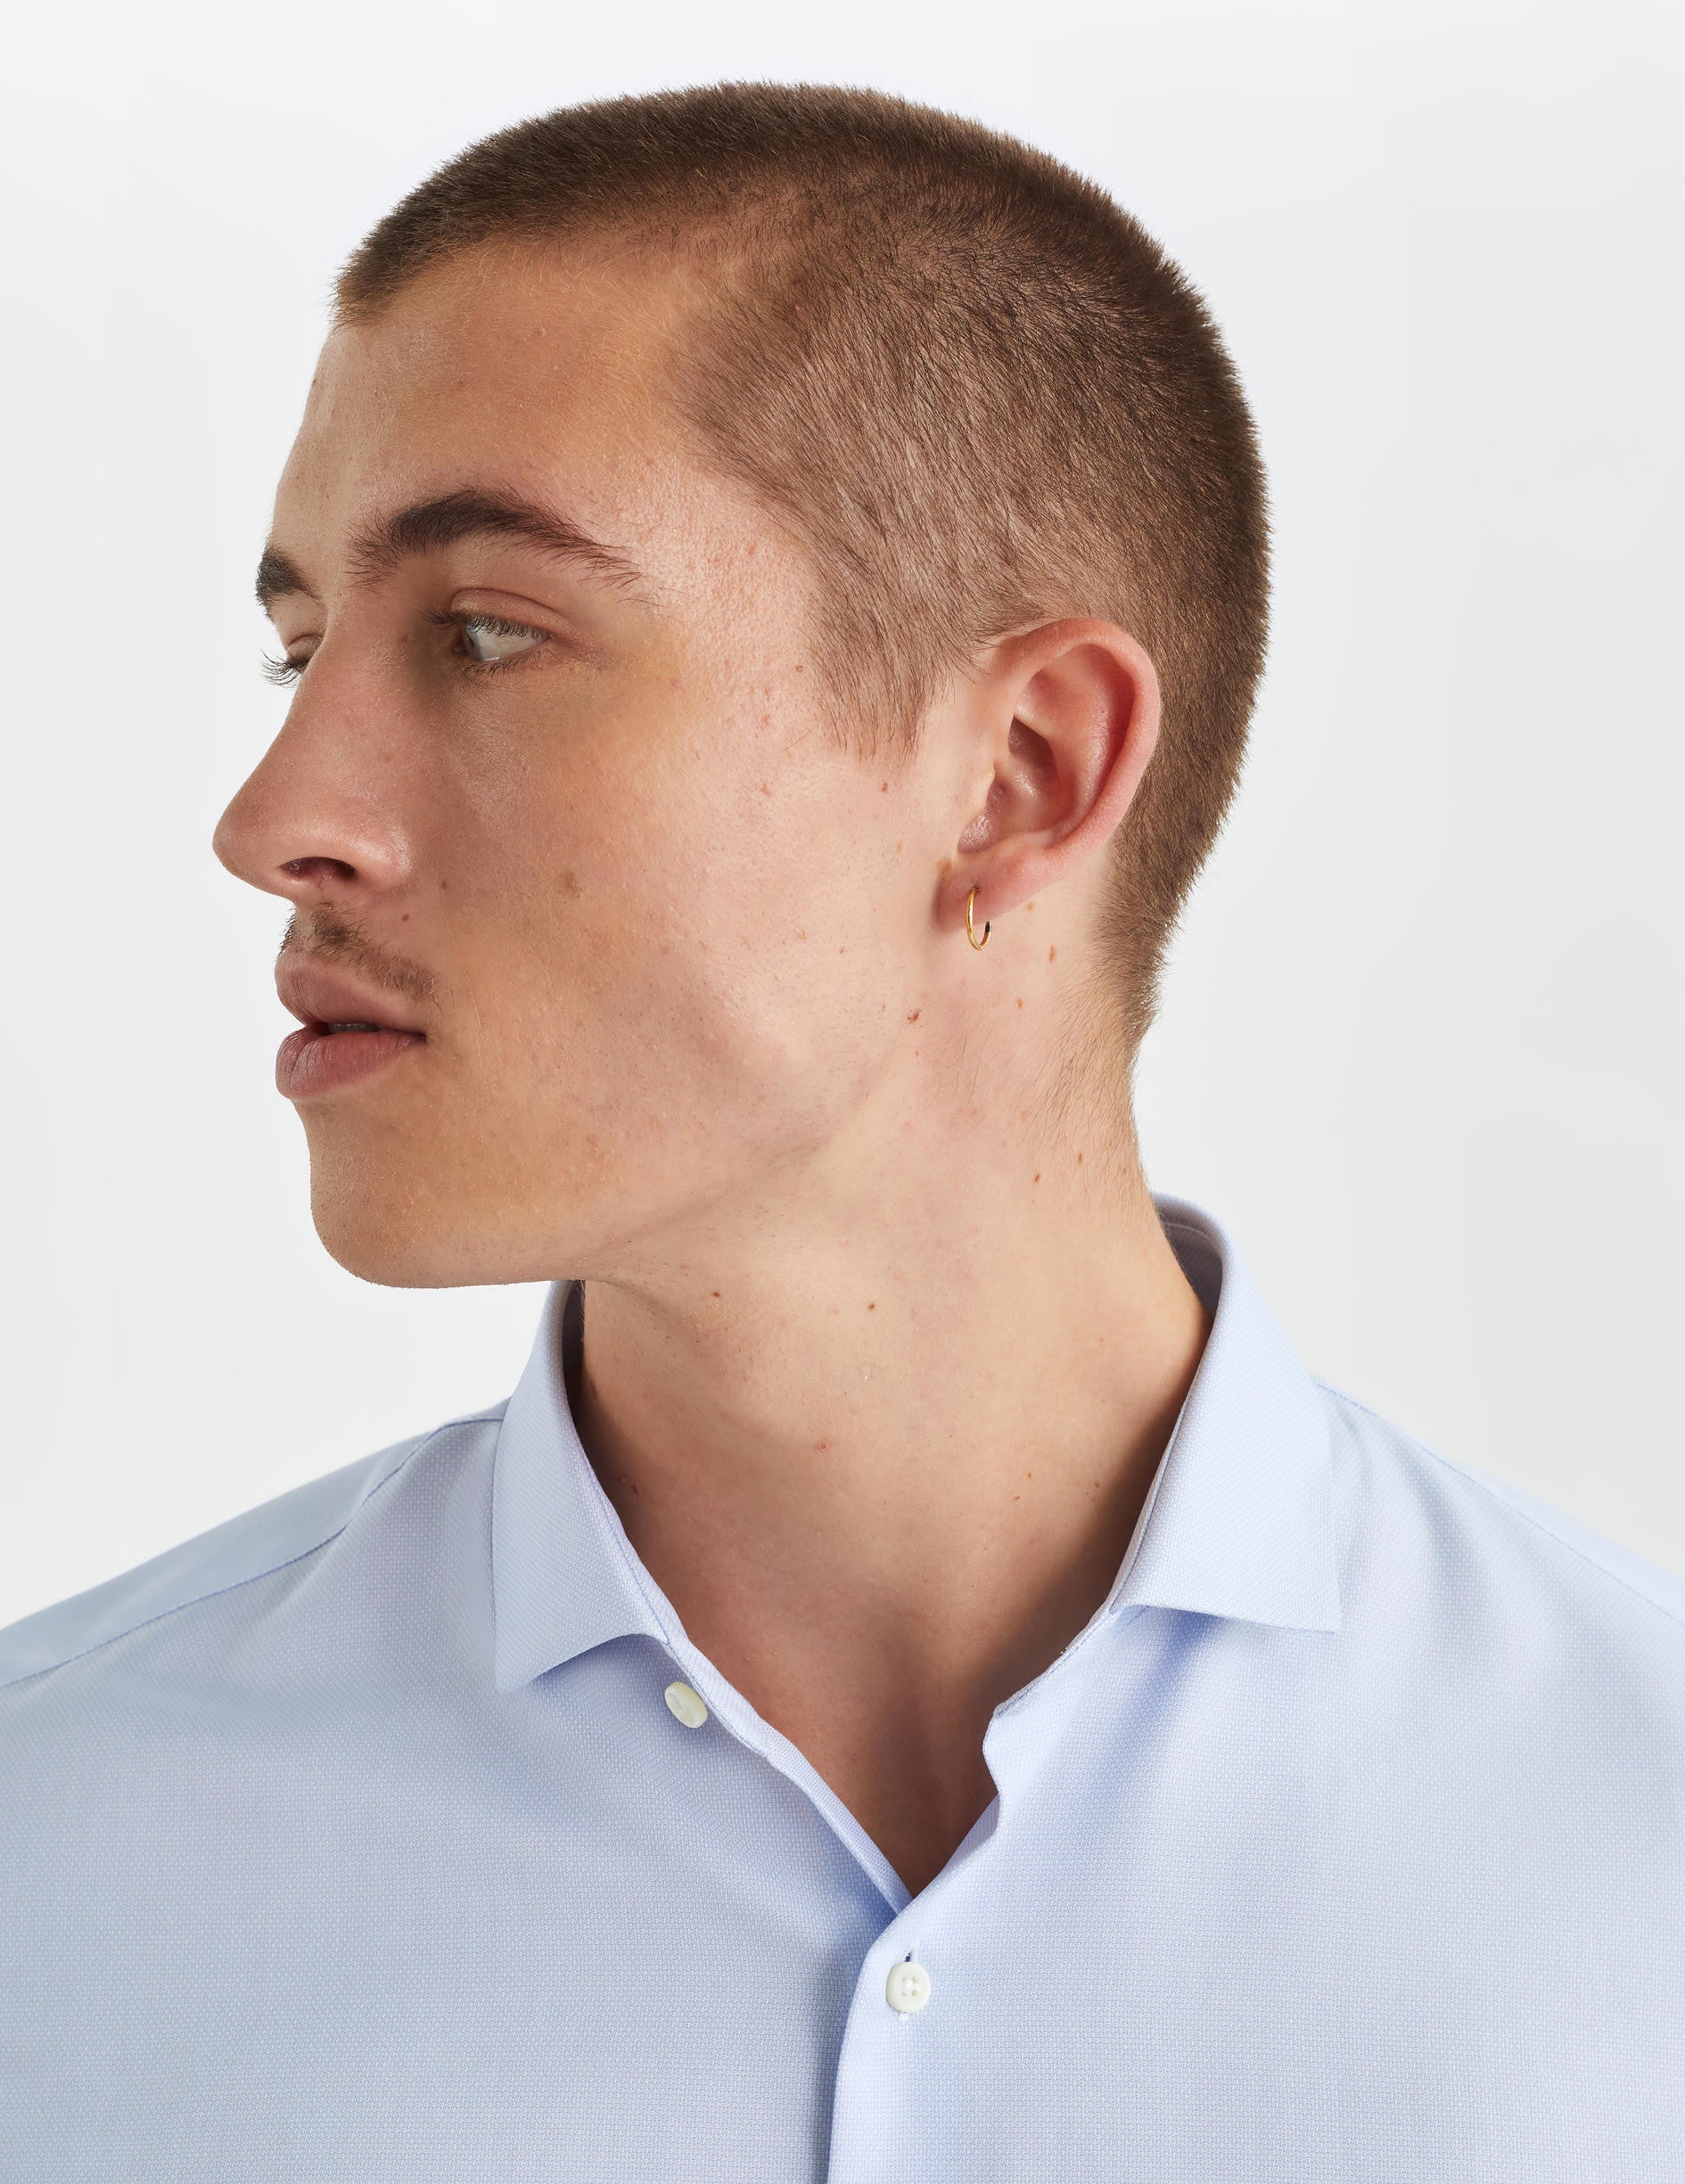 Fitted blue shirt - Shaped - Thin Collar